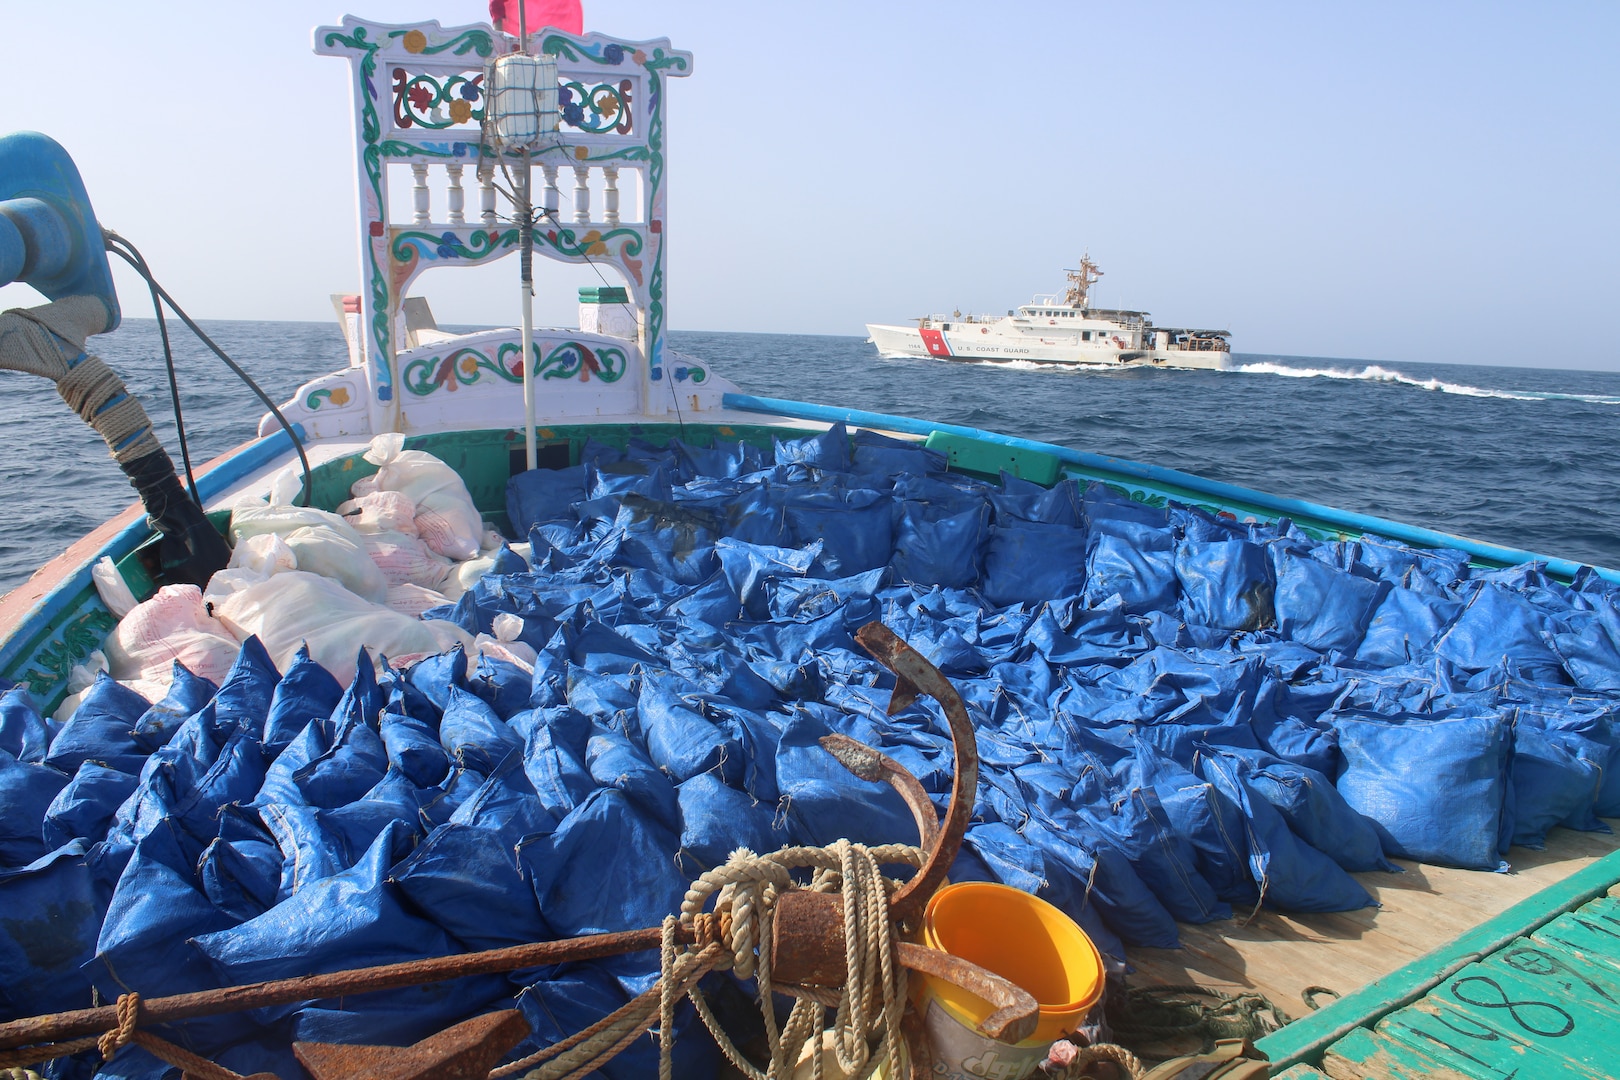 GULF OF OMAN (Aug. 30, 2022) Bags of illegal narcotics sit on the deck of a fishing vessel interdicted by U.S. Coast Guard fast response cutter USCGC Glen Harris (WPC 1144) in the Gulf of Oman, Aug. 30.